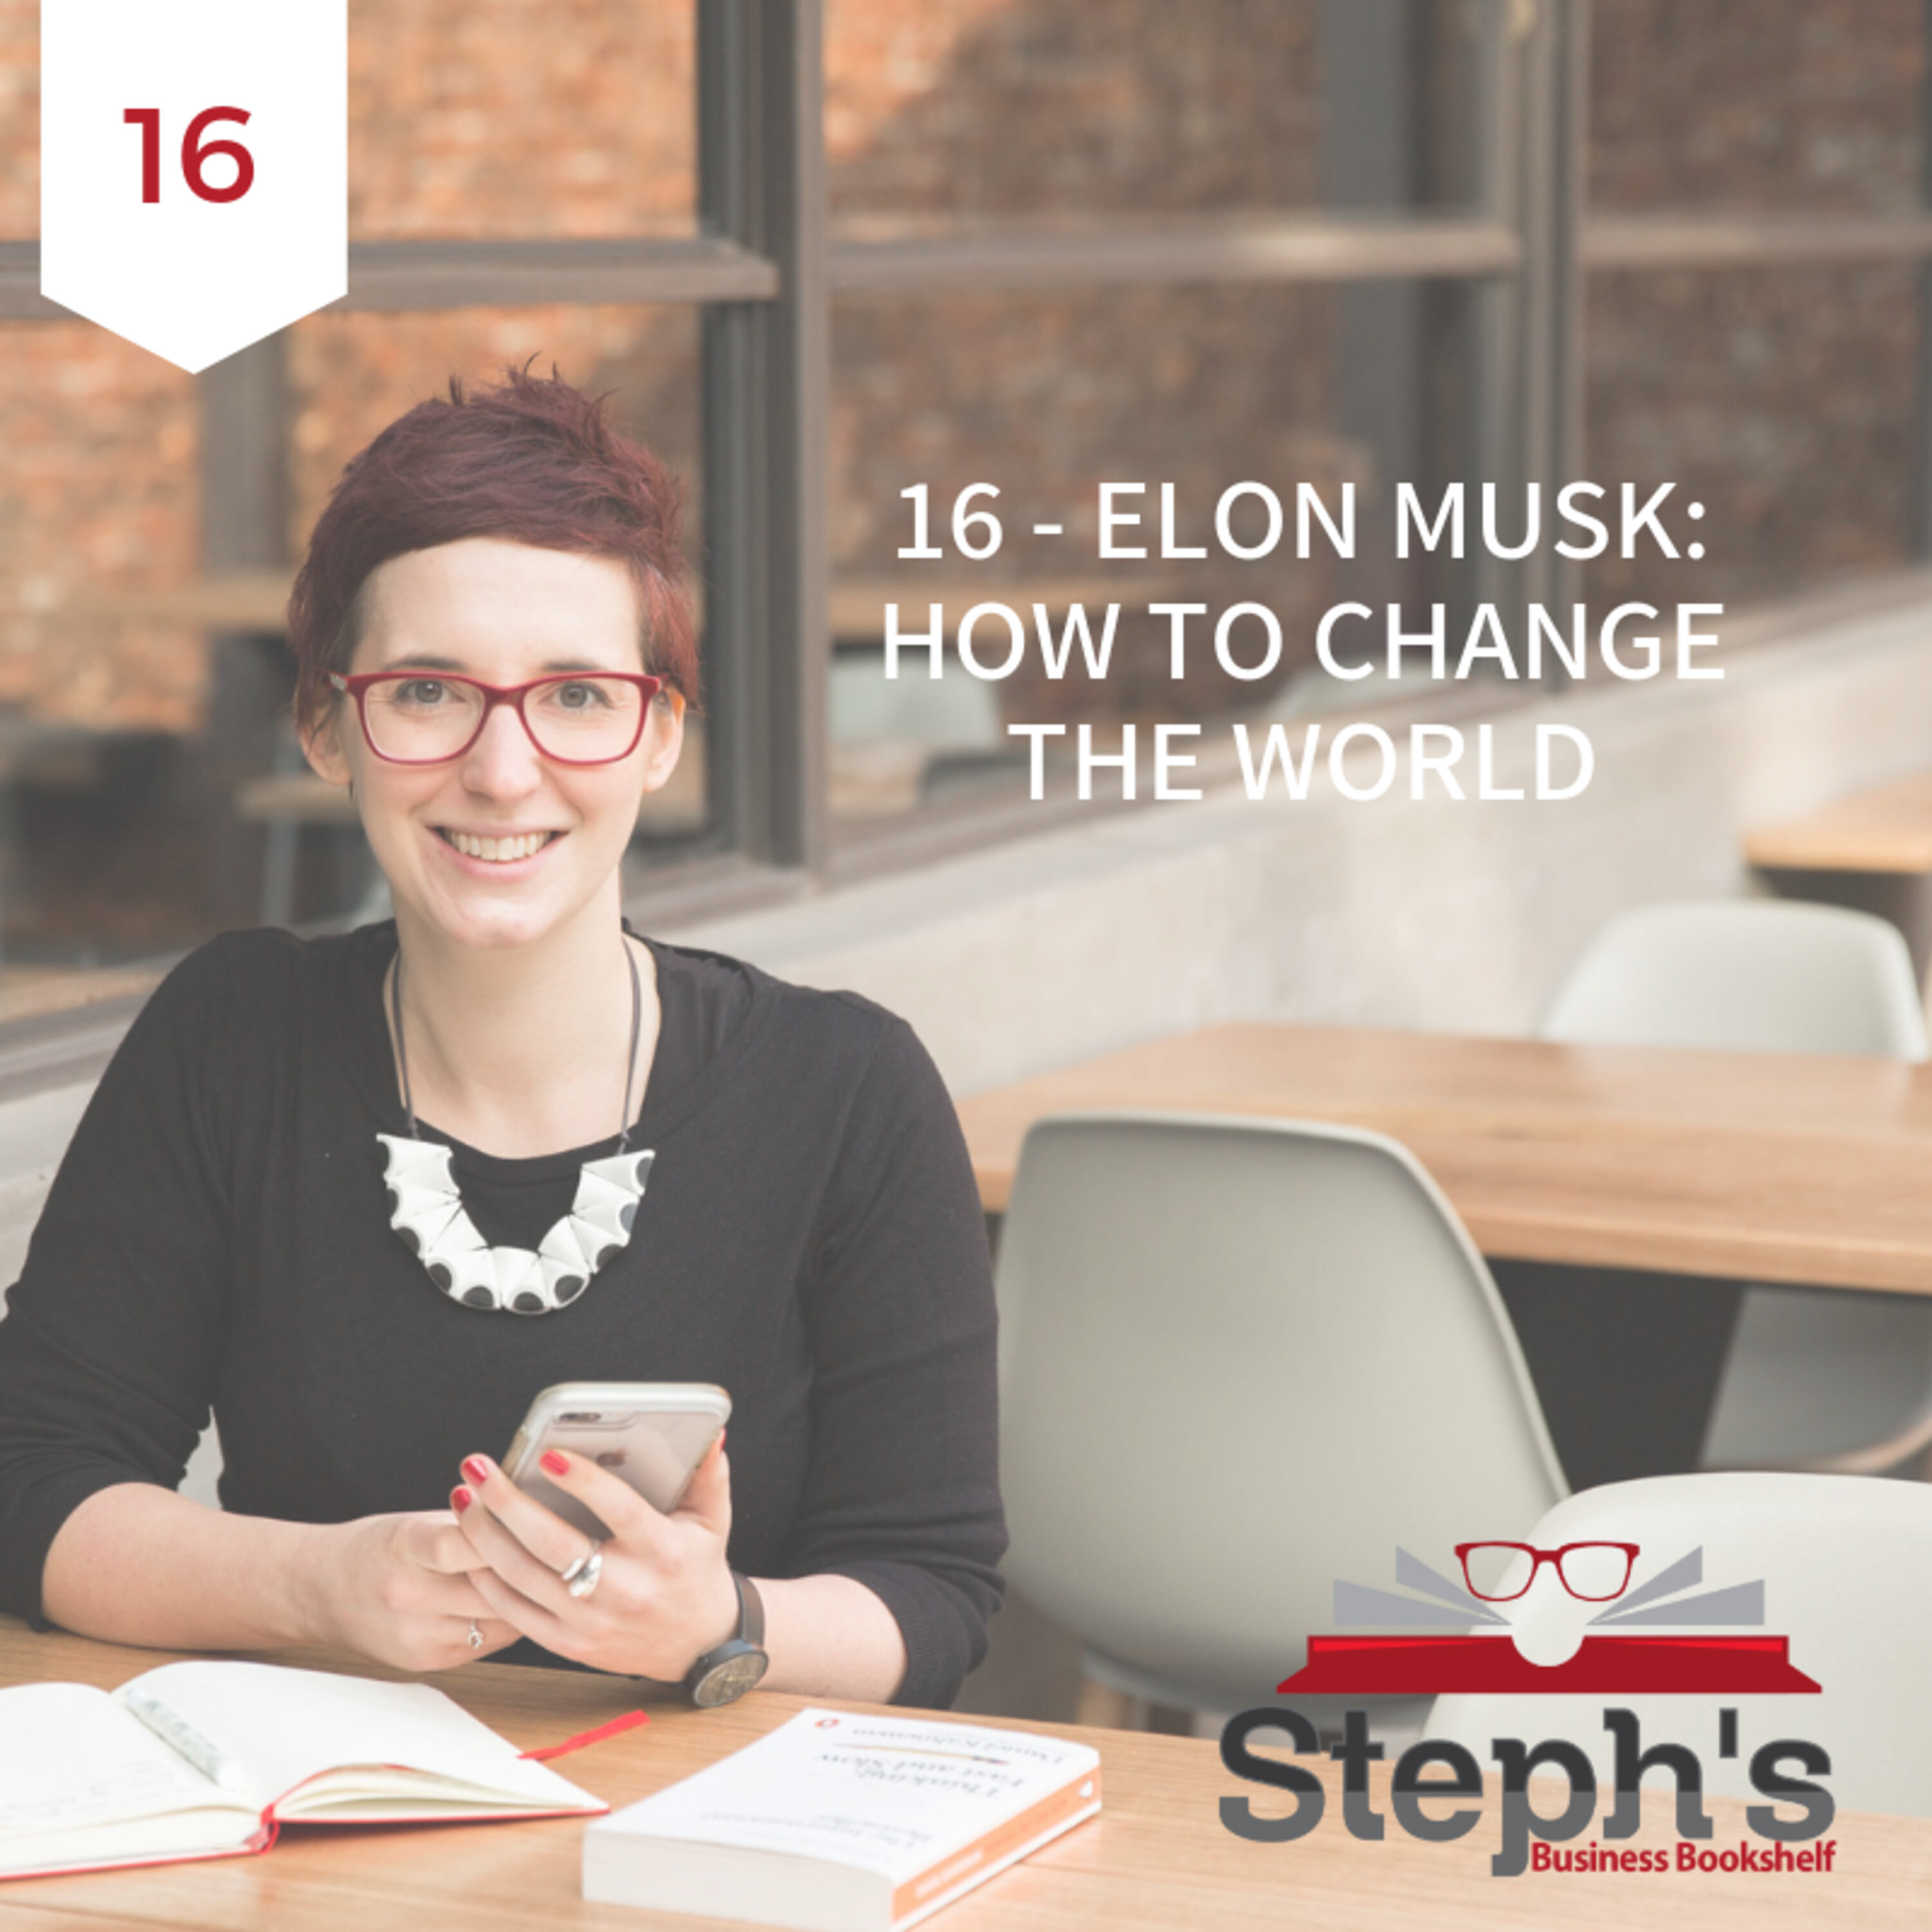 Elon Musk by Ashlee Vance: How to change the world